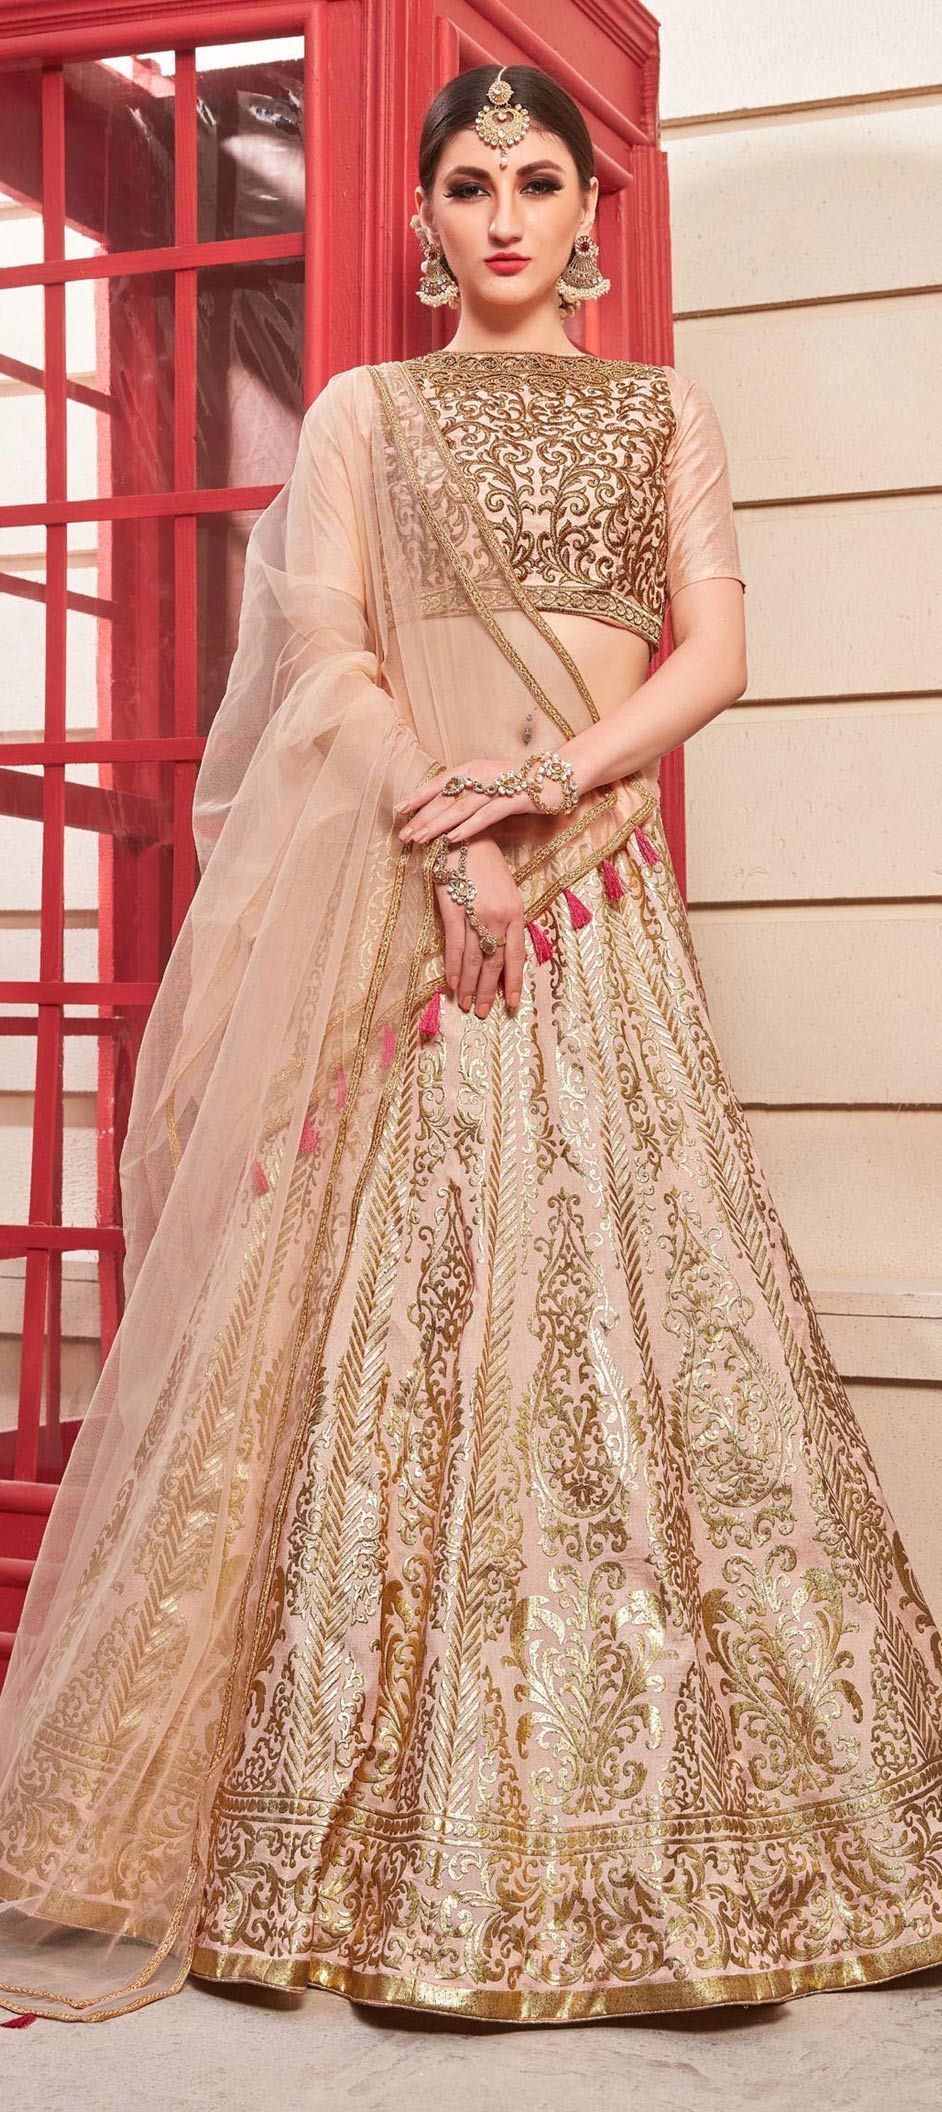 Craftsvilla - Rs. 4250. Click here to buy: http://www.craftsvilla .com/catalog/product/view/id/799150/s/traditional-lehenga -indian-bollywood-designer-party-ethinic-wear-wedding/ | Facebook